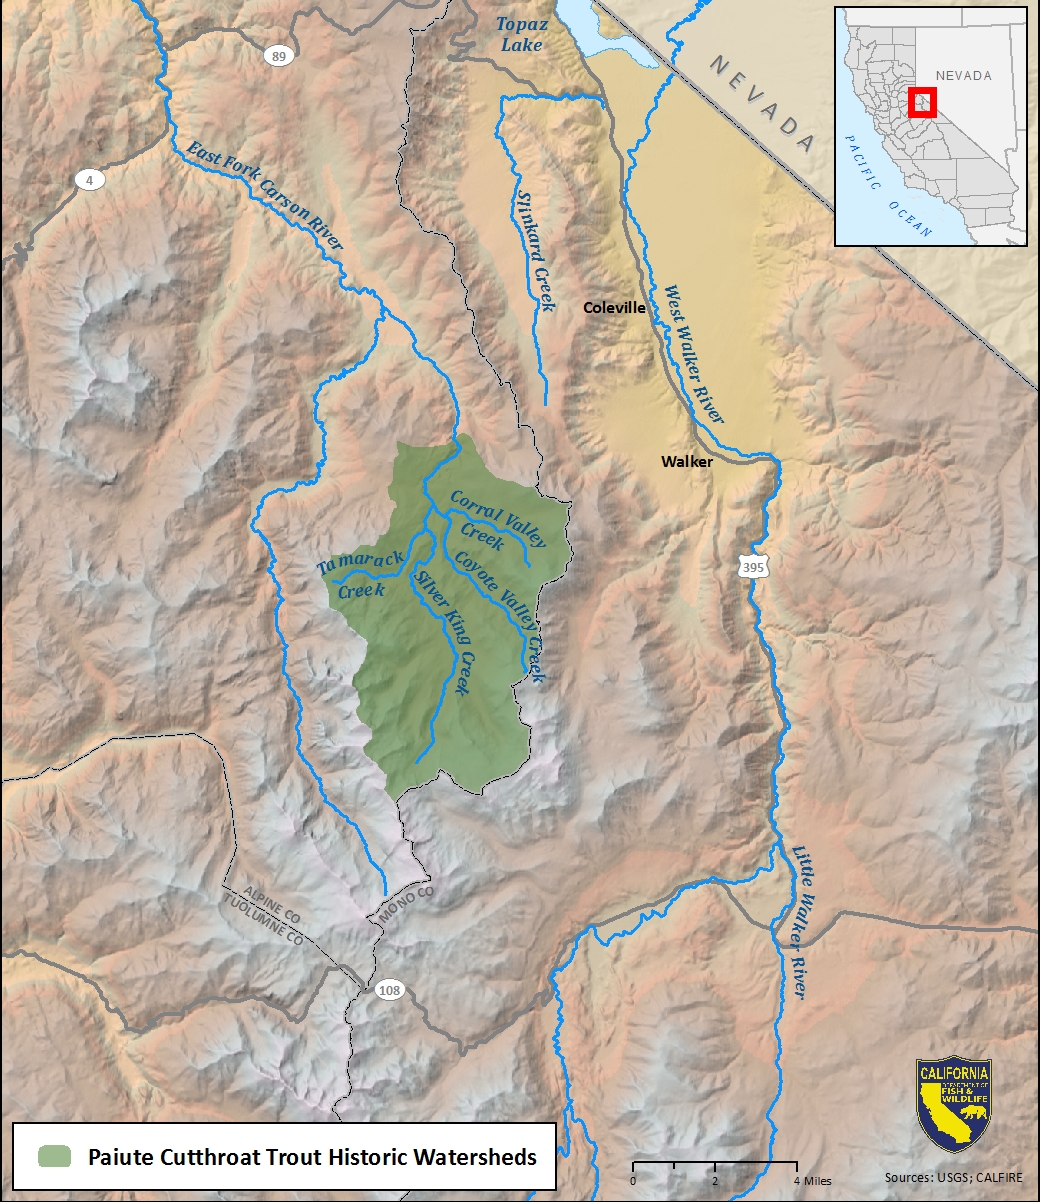 Map of Paiute cutthroat trout historic watershed - click to open in new window